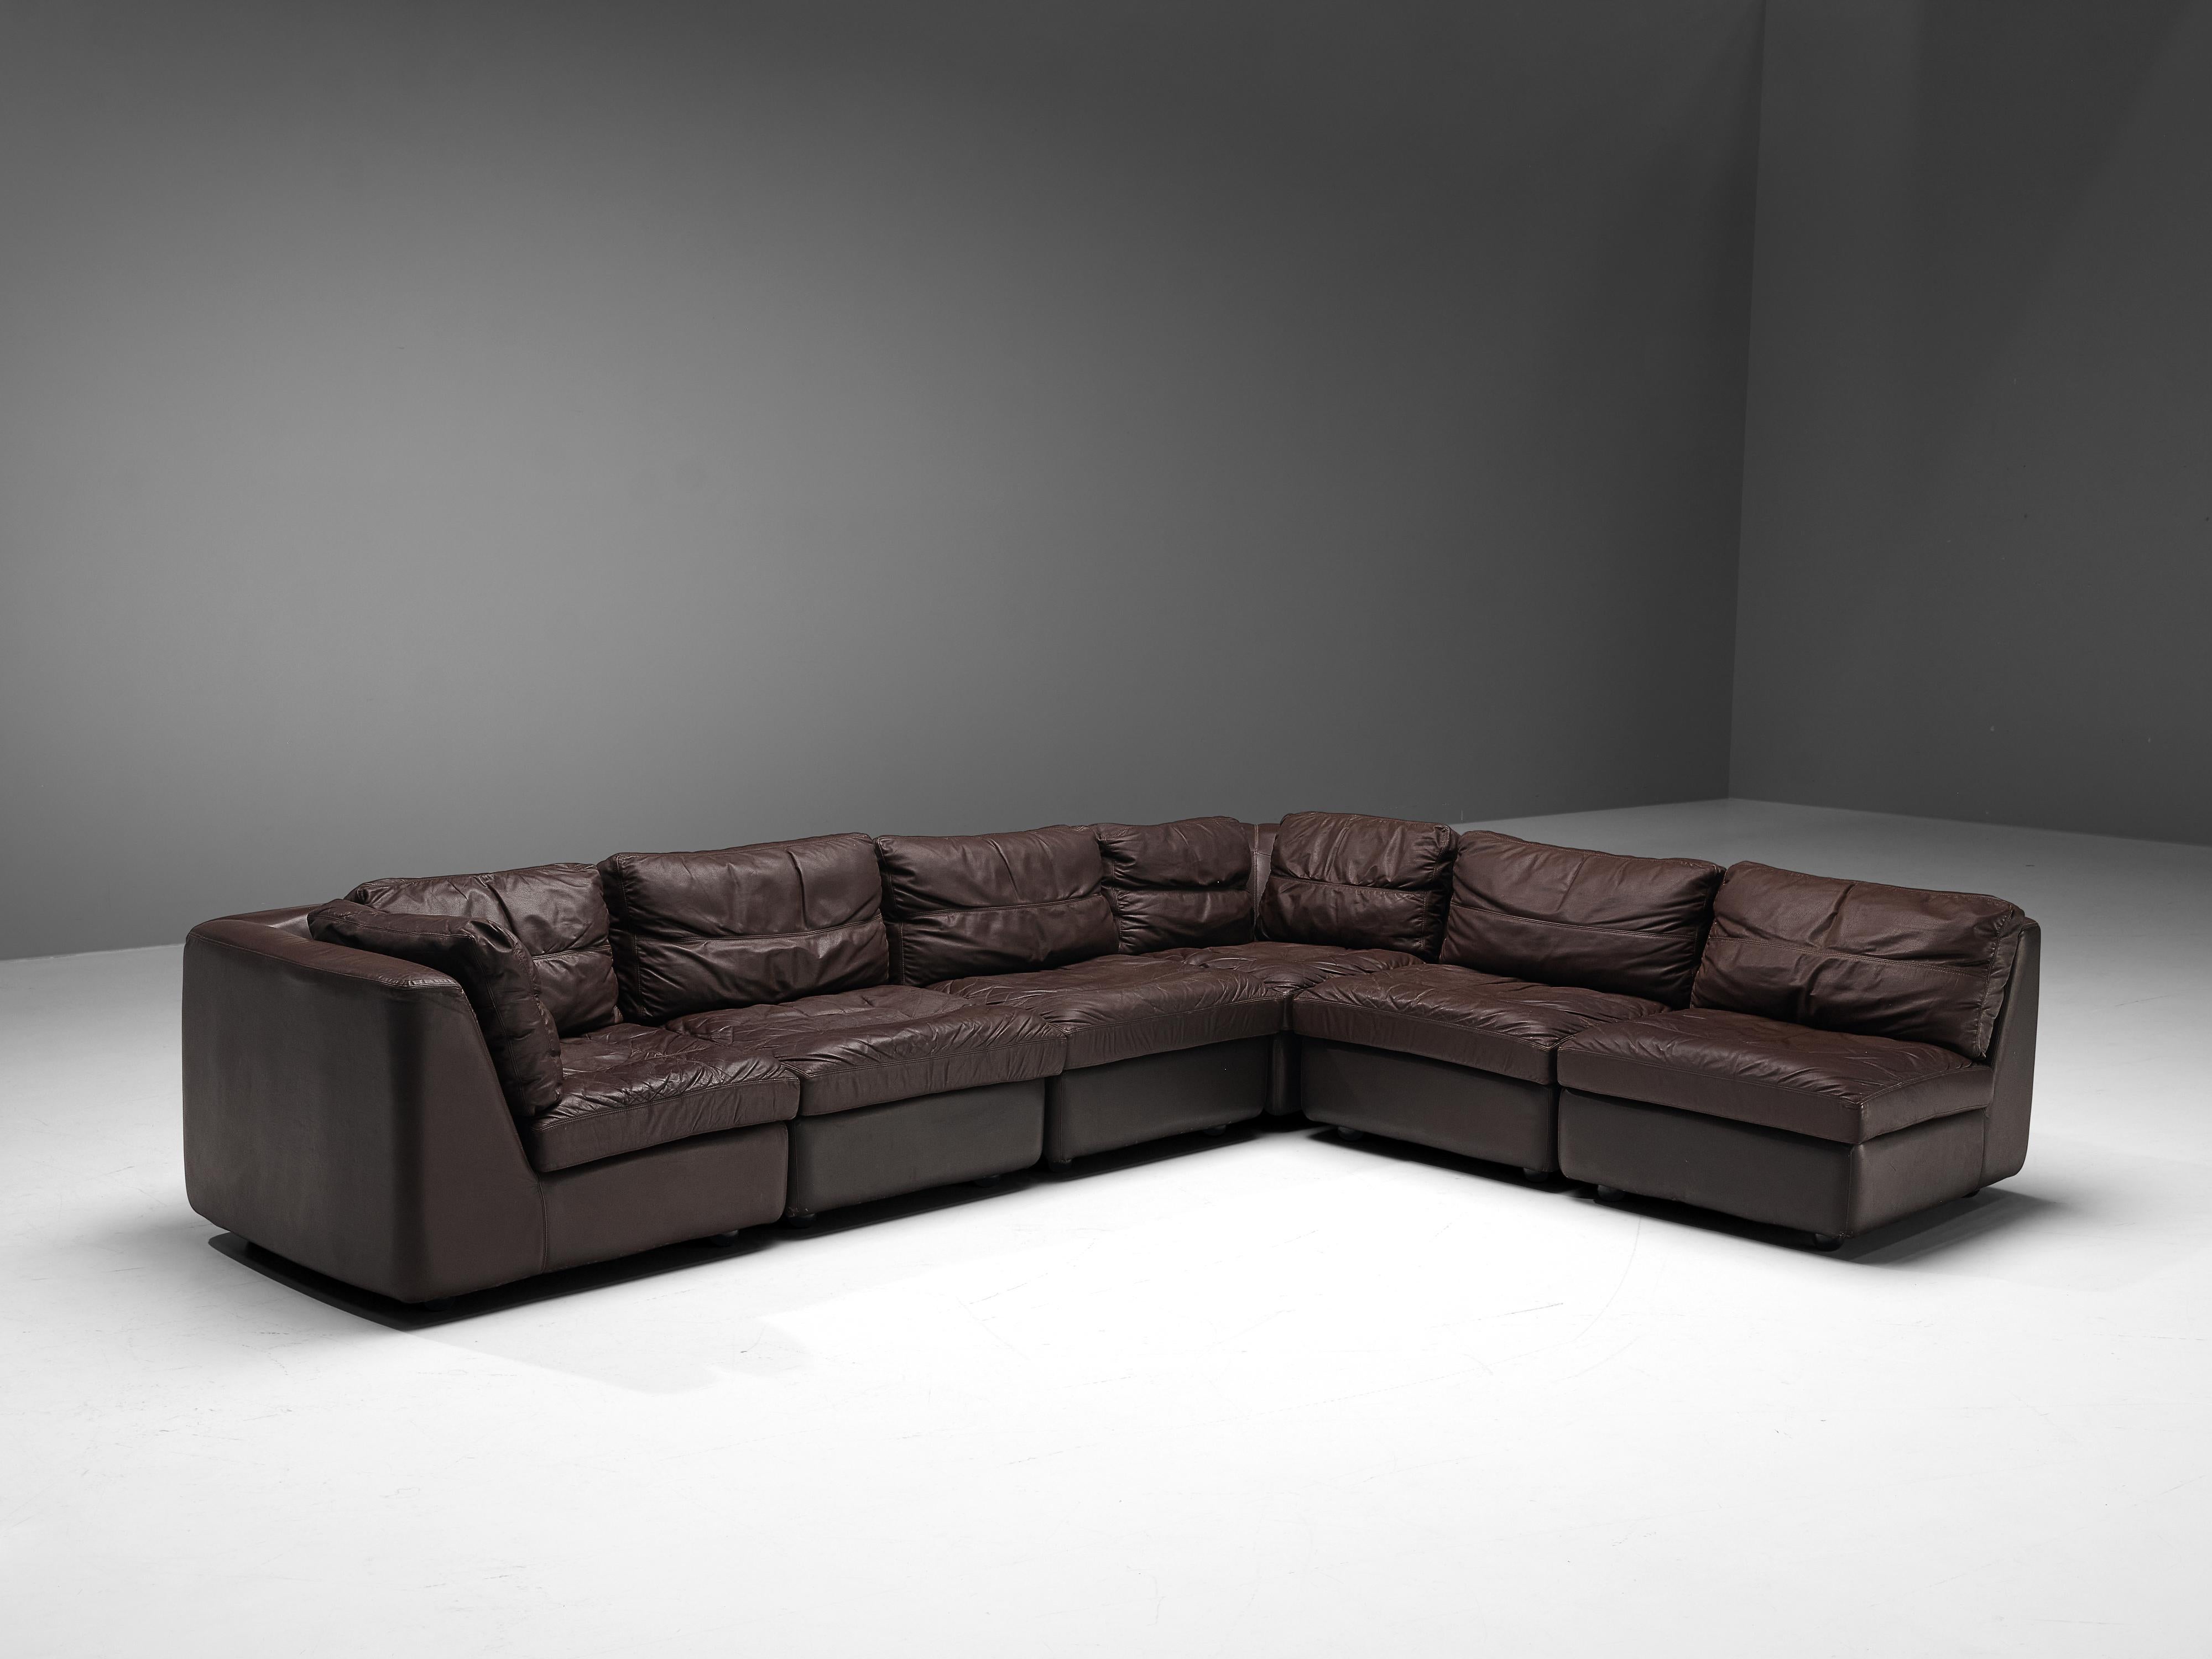 Late 20th Century Sectional Sofa in Patinated Brown Leather